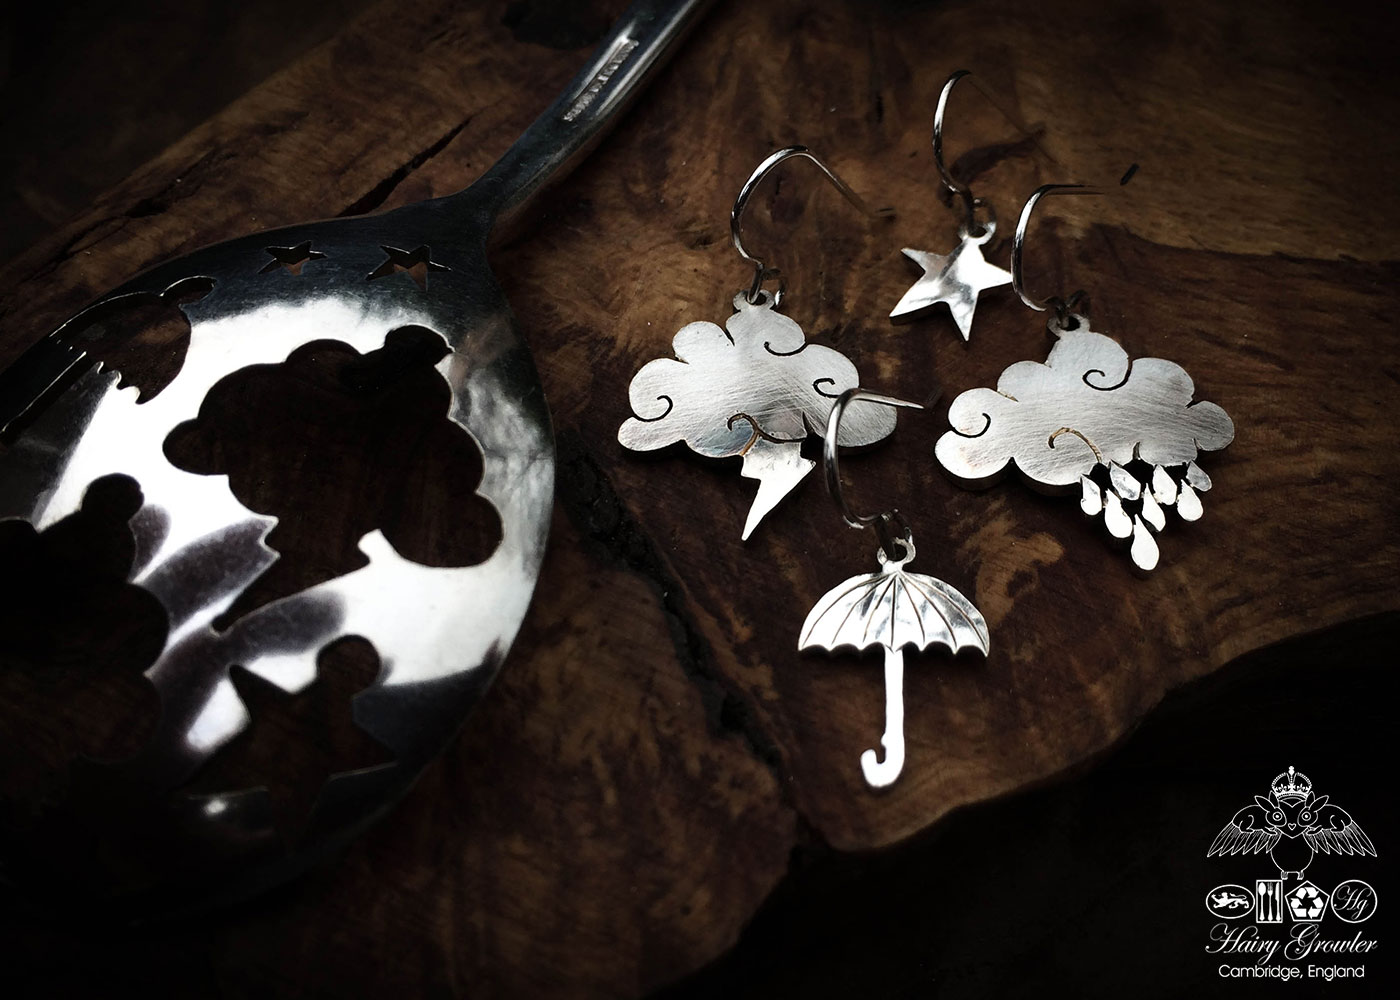 handcrafted and recycled spoon cloud and umbrella summertime earrings